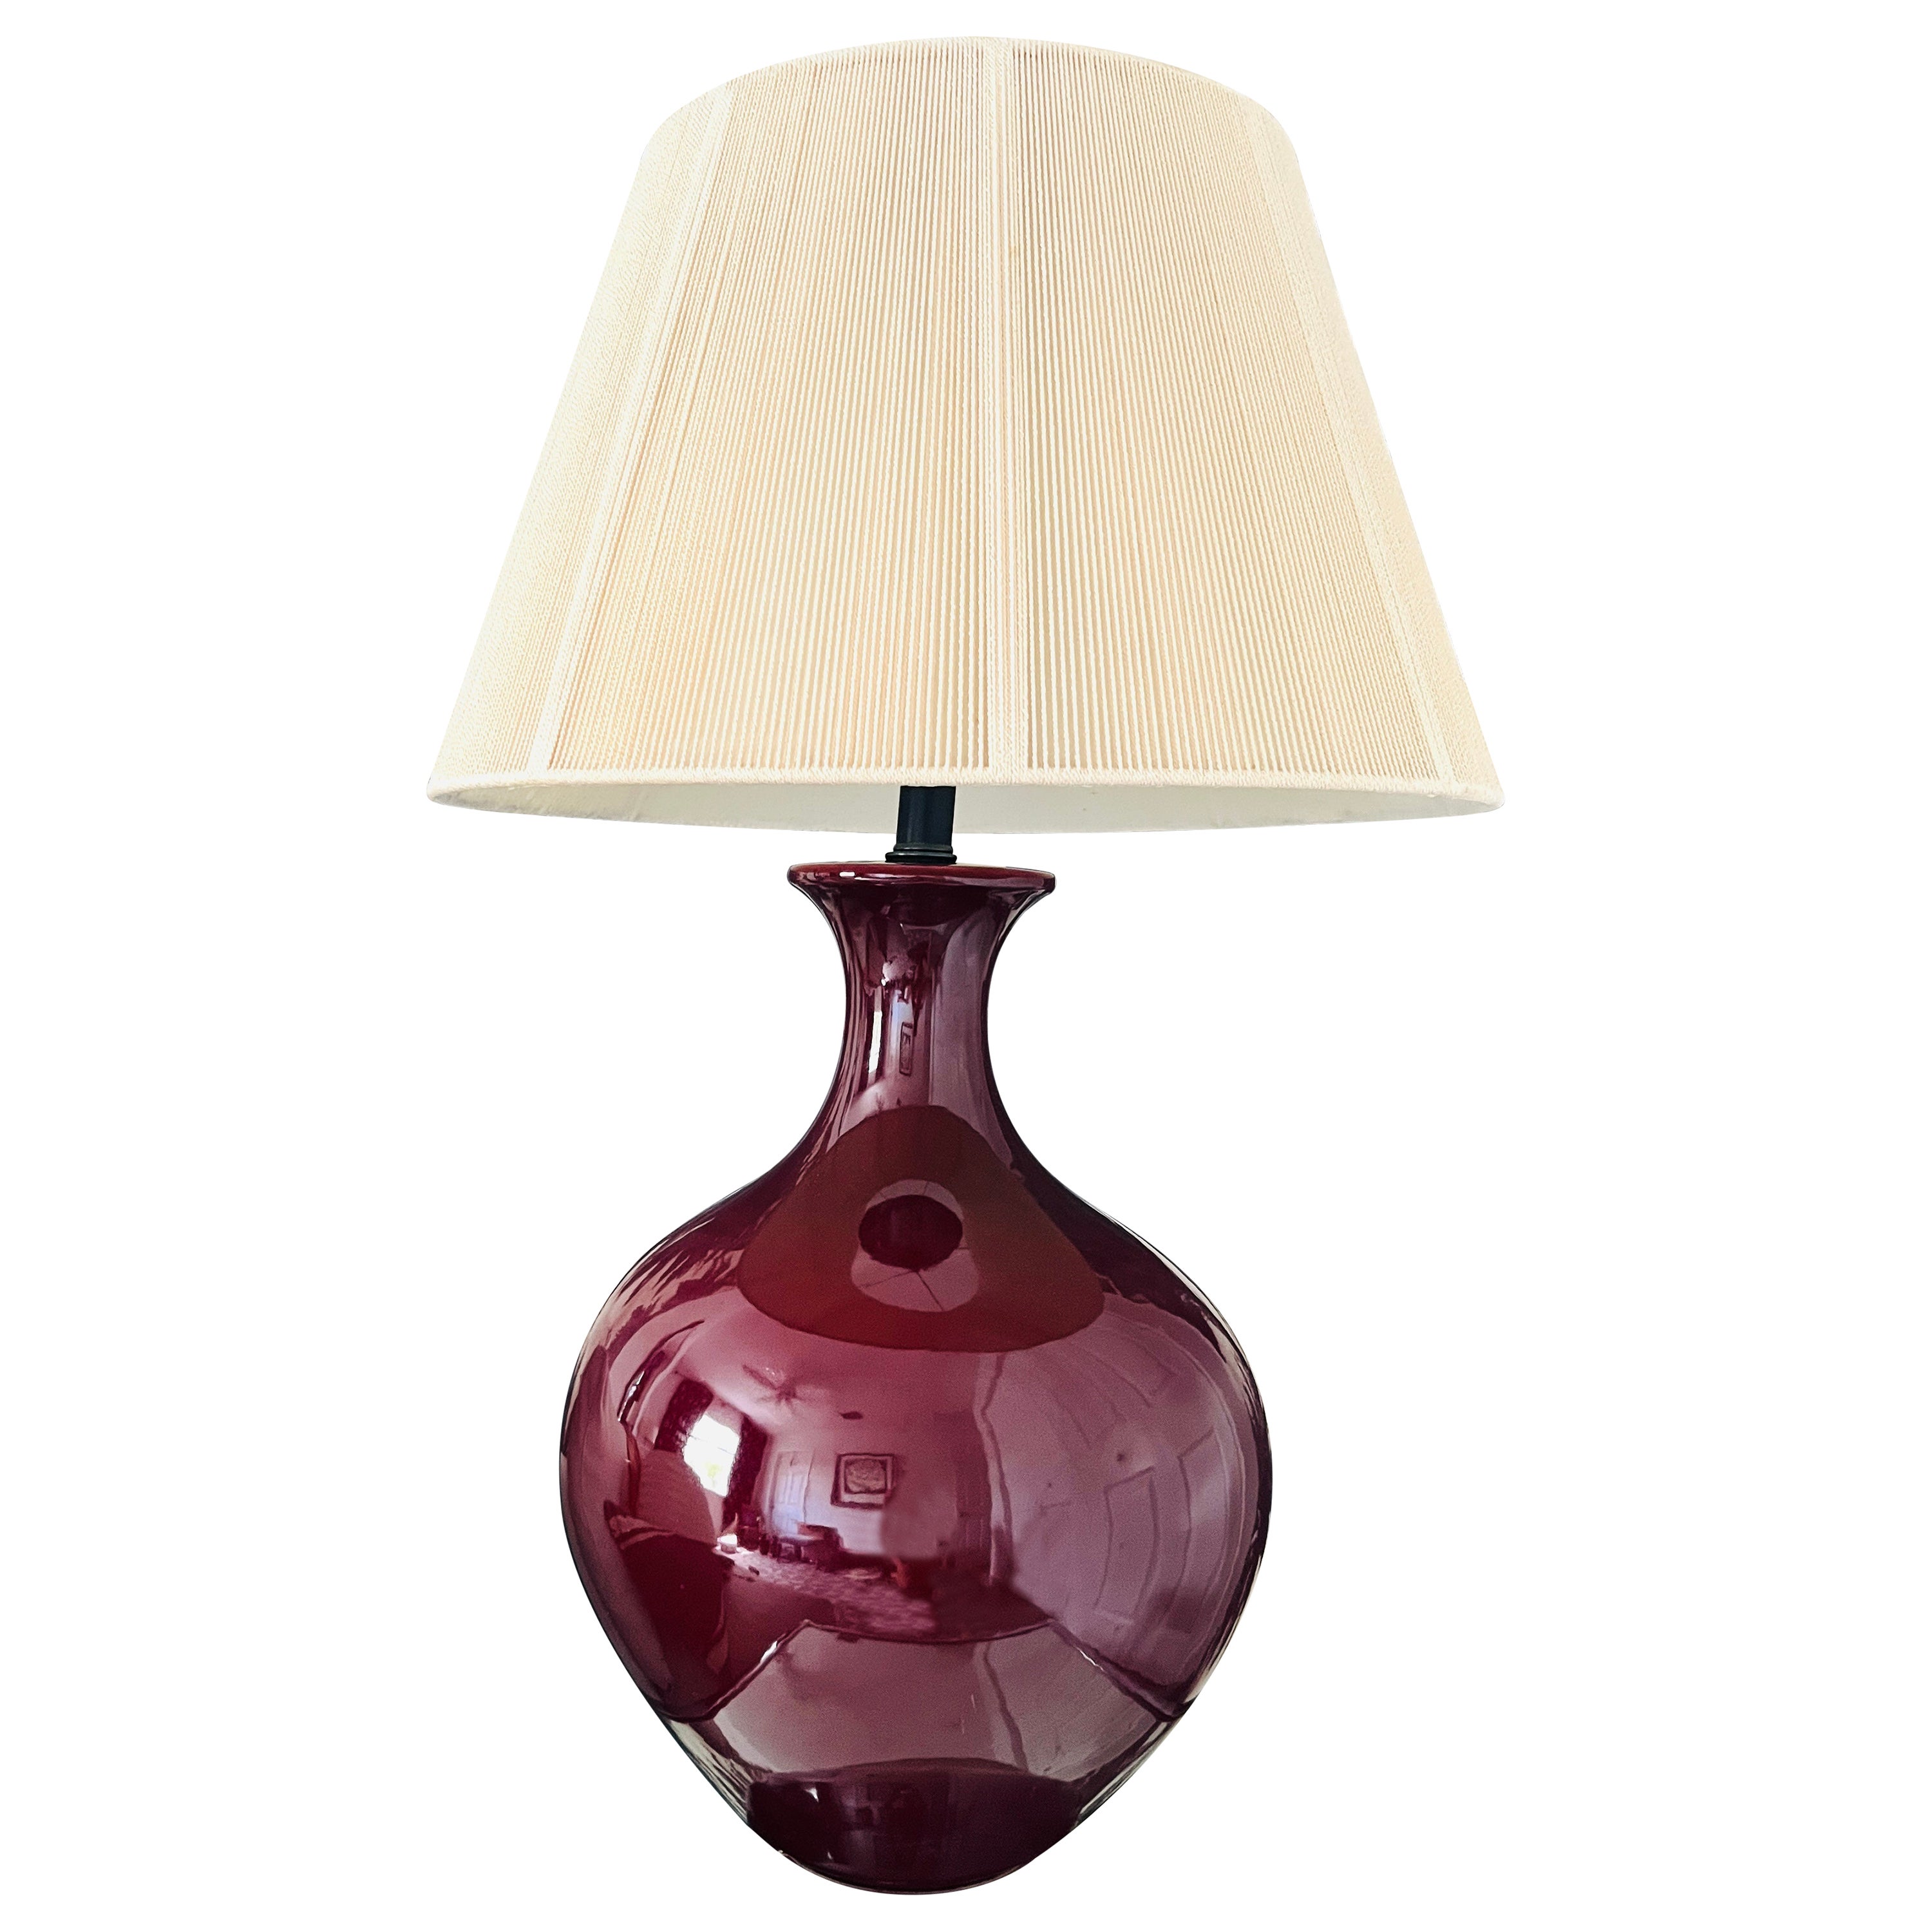 Monumental Porcelain Oxblood Lamp in Burgundy Red by Marbro, c. 1970's